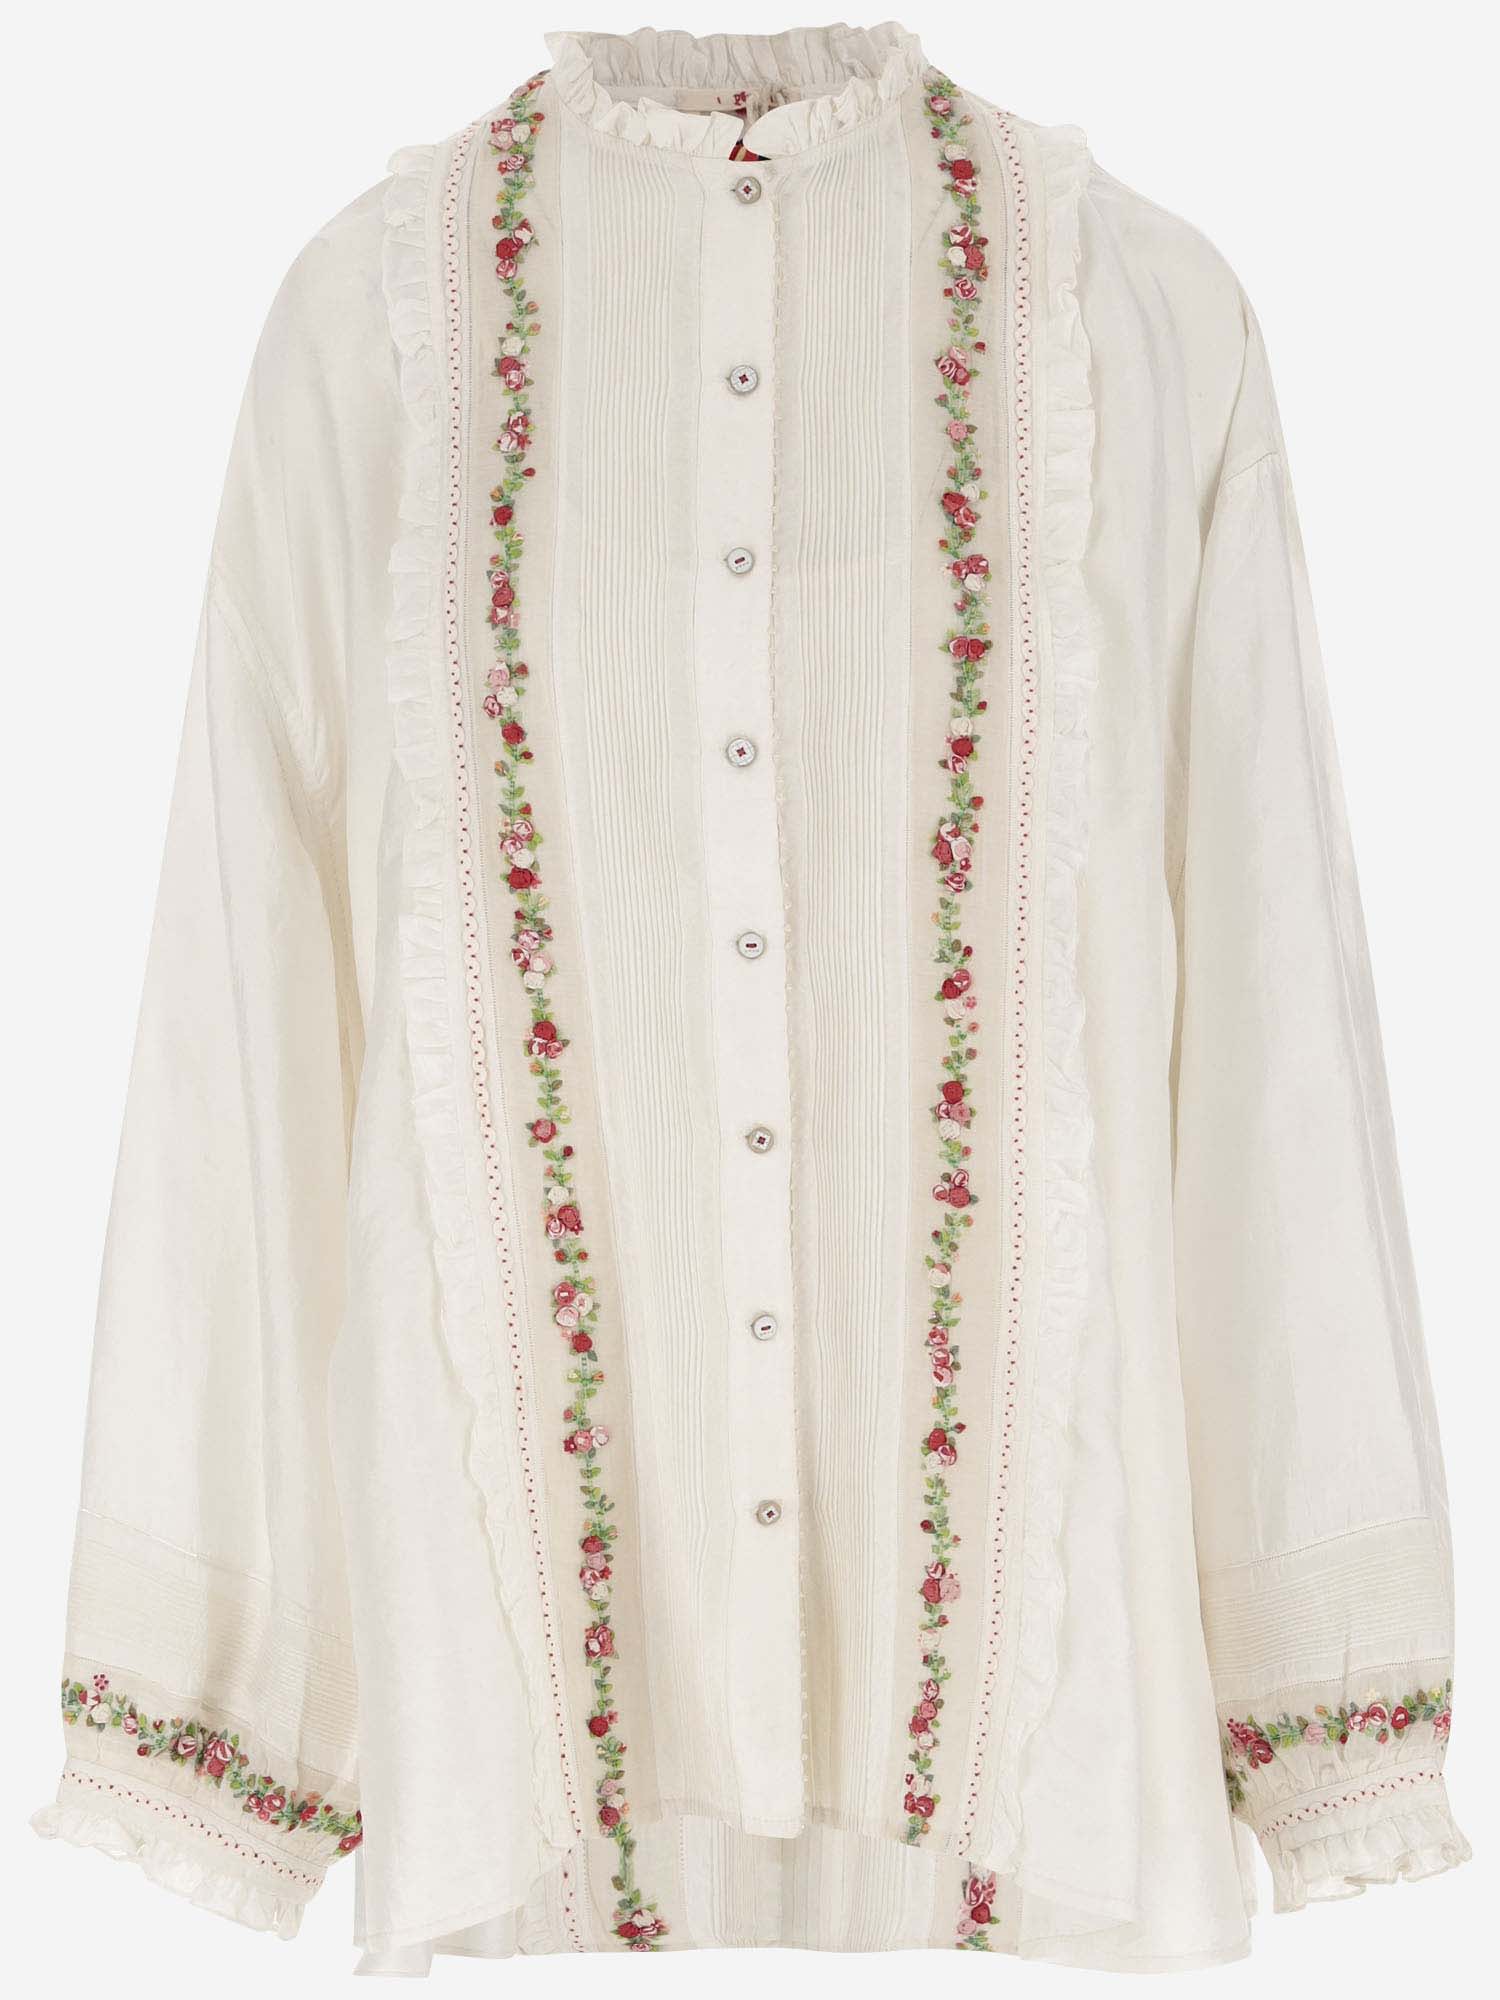 Péro Silk Shirt With Floral Embroidery In Red